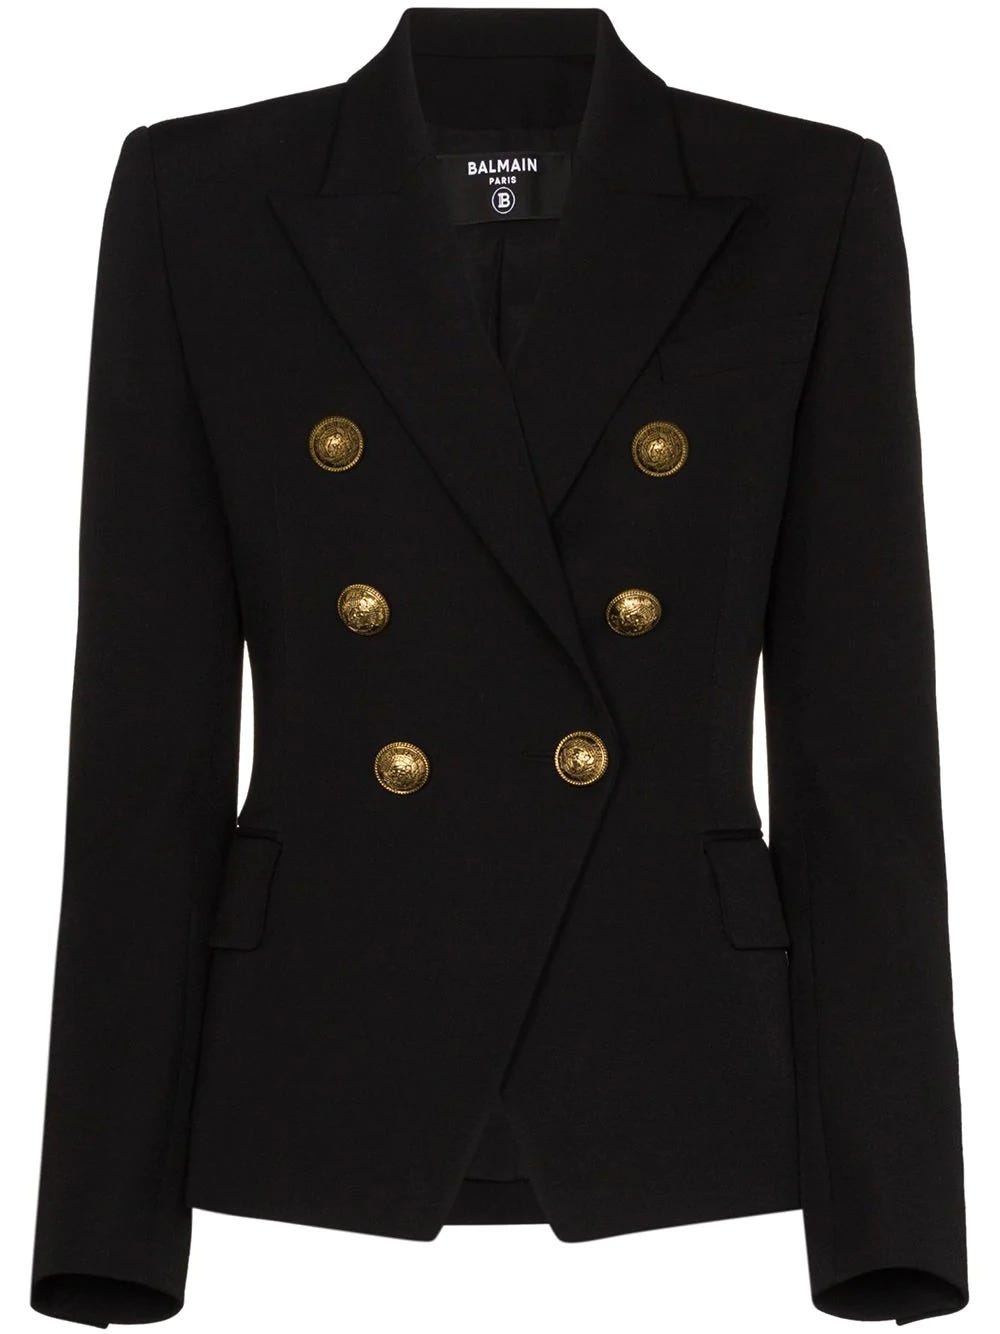 Wool blazer with double-breasted gold-tone button closure